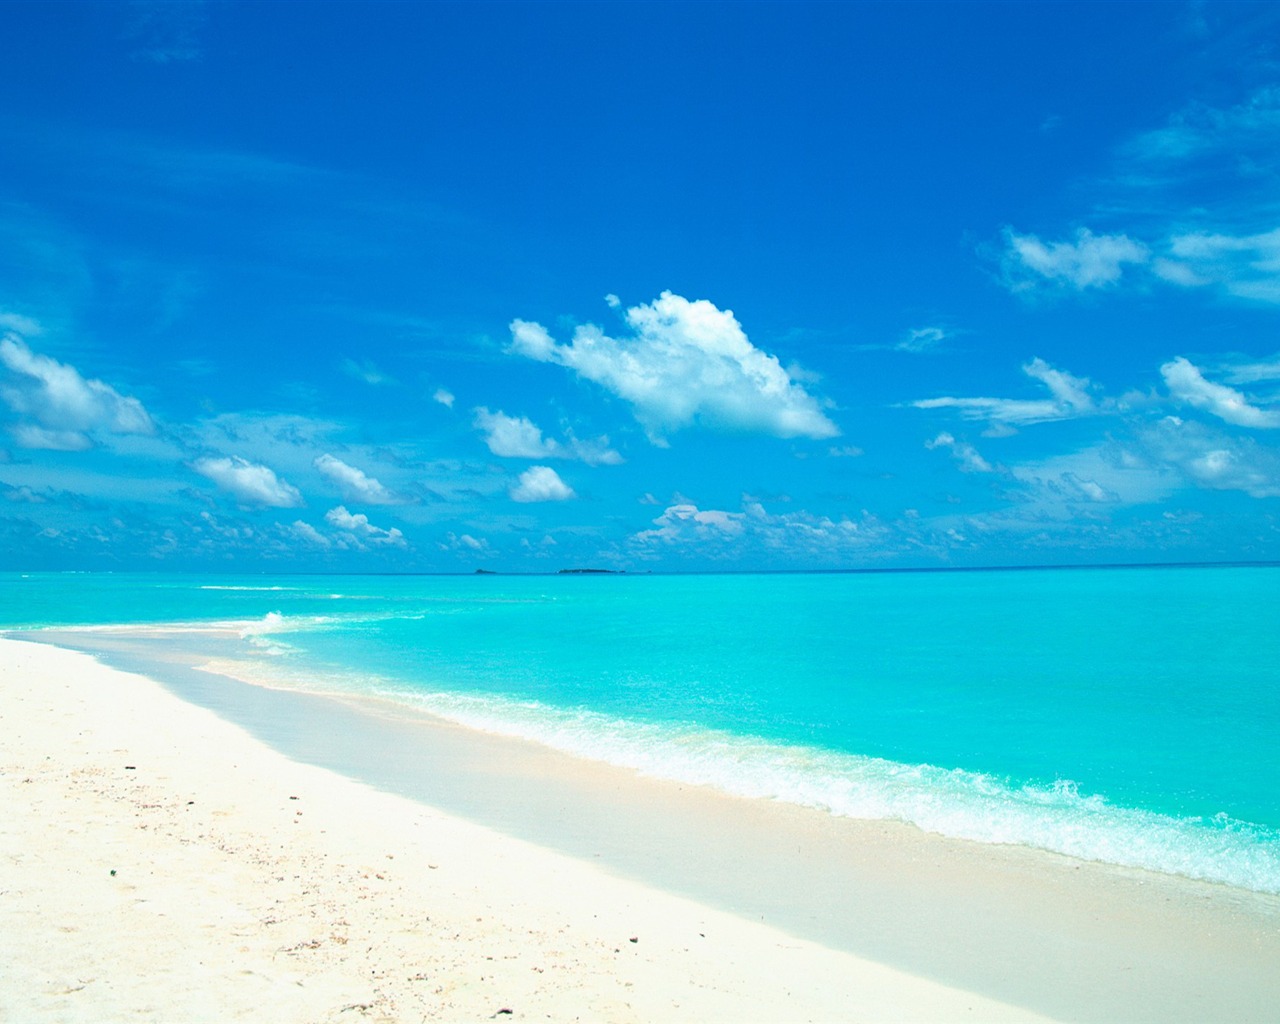 Blue Sky And Water In The White Sand Beach Wallpaper